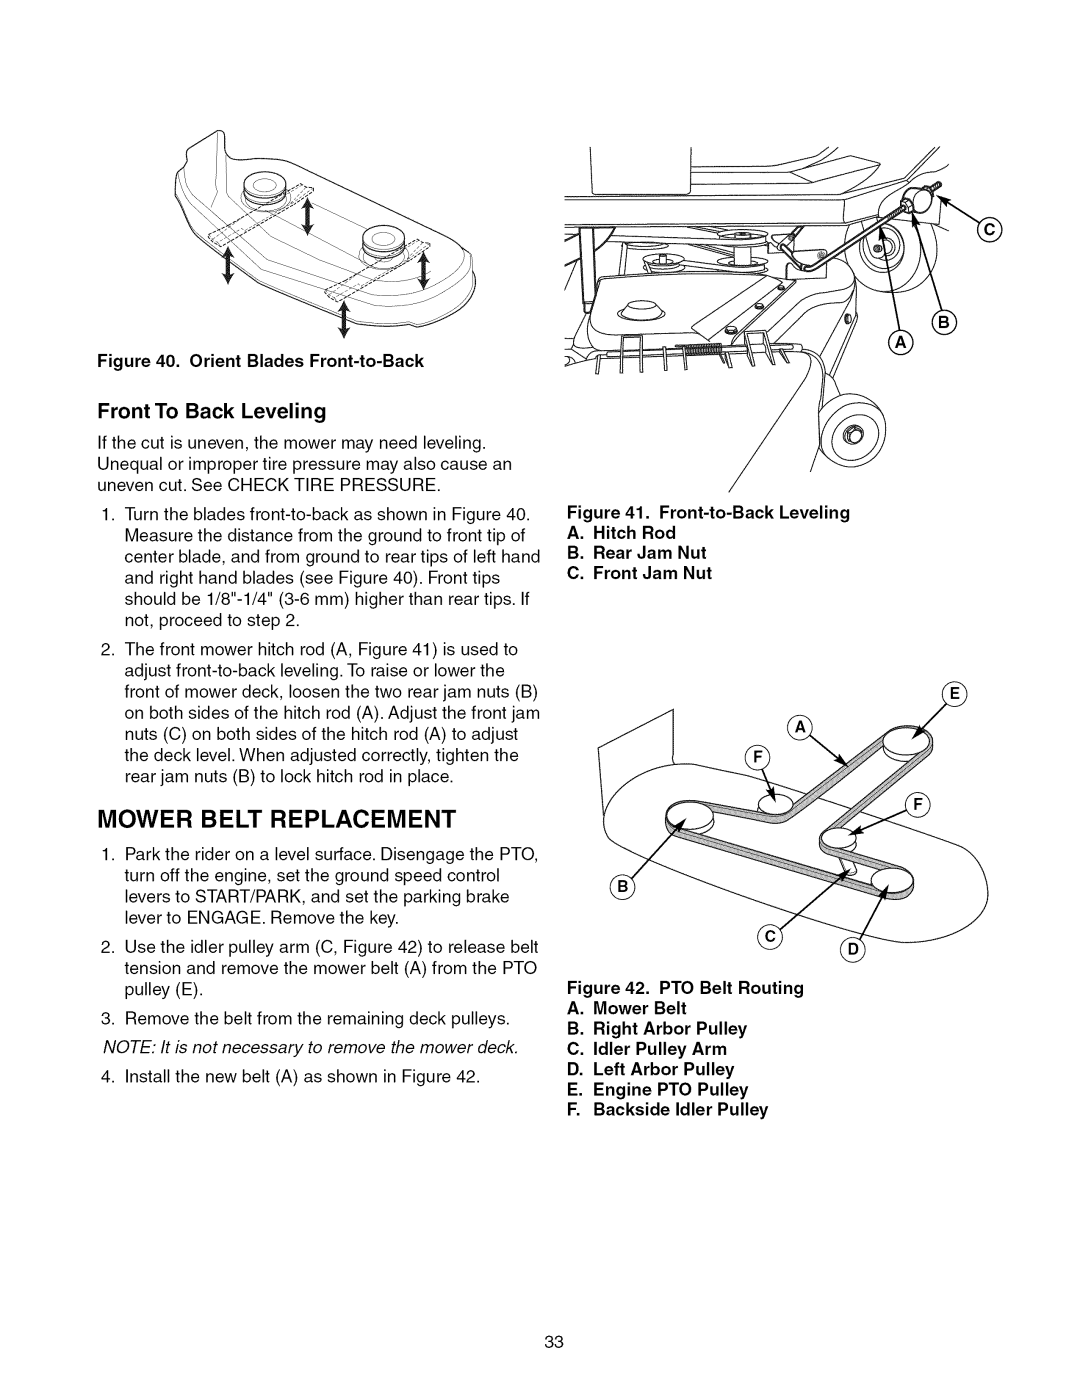 Craftsman ZTS 6000 Mower Belt Replacement, Front To Back Leveling, Orient Blades Front-to-Back, F. Backside Idler Pulley 